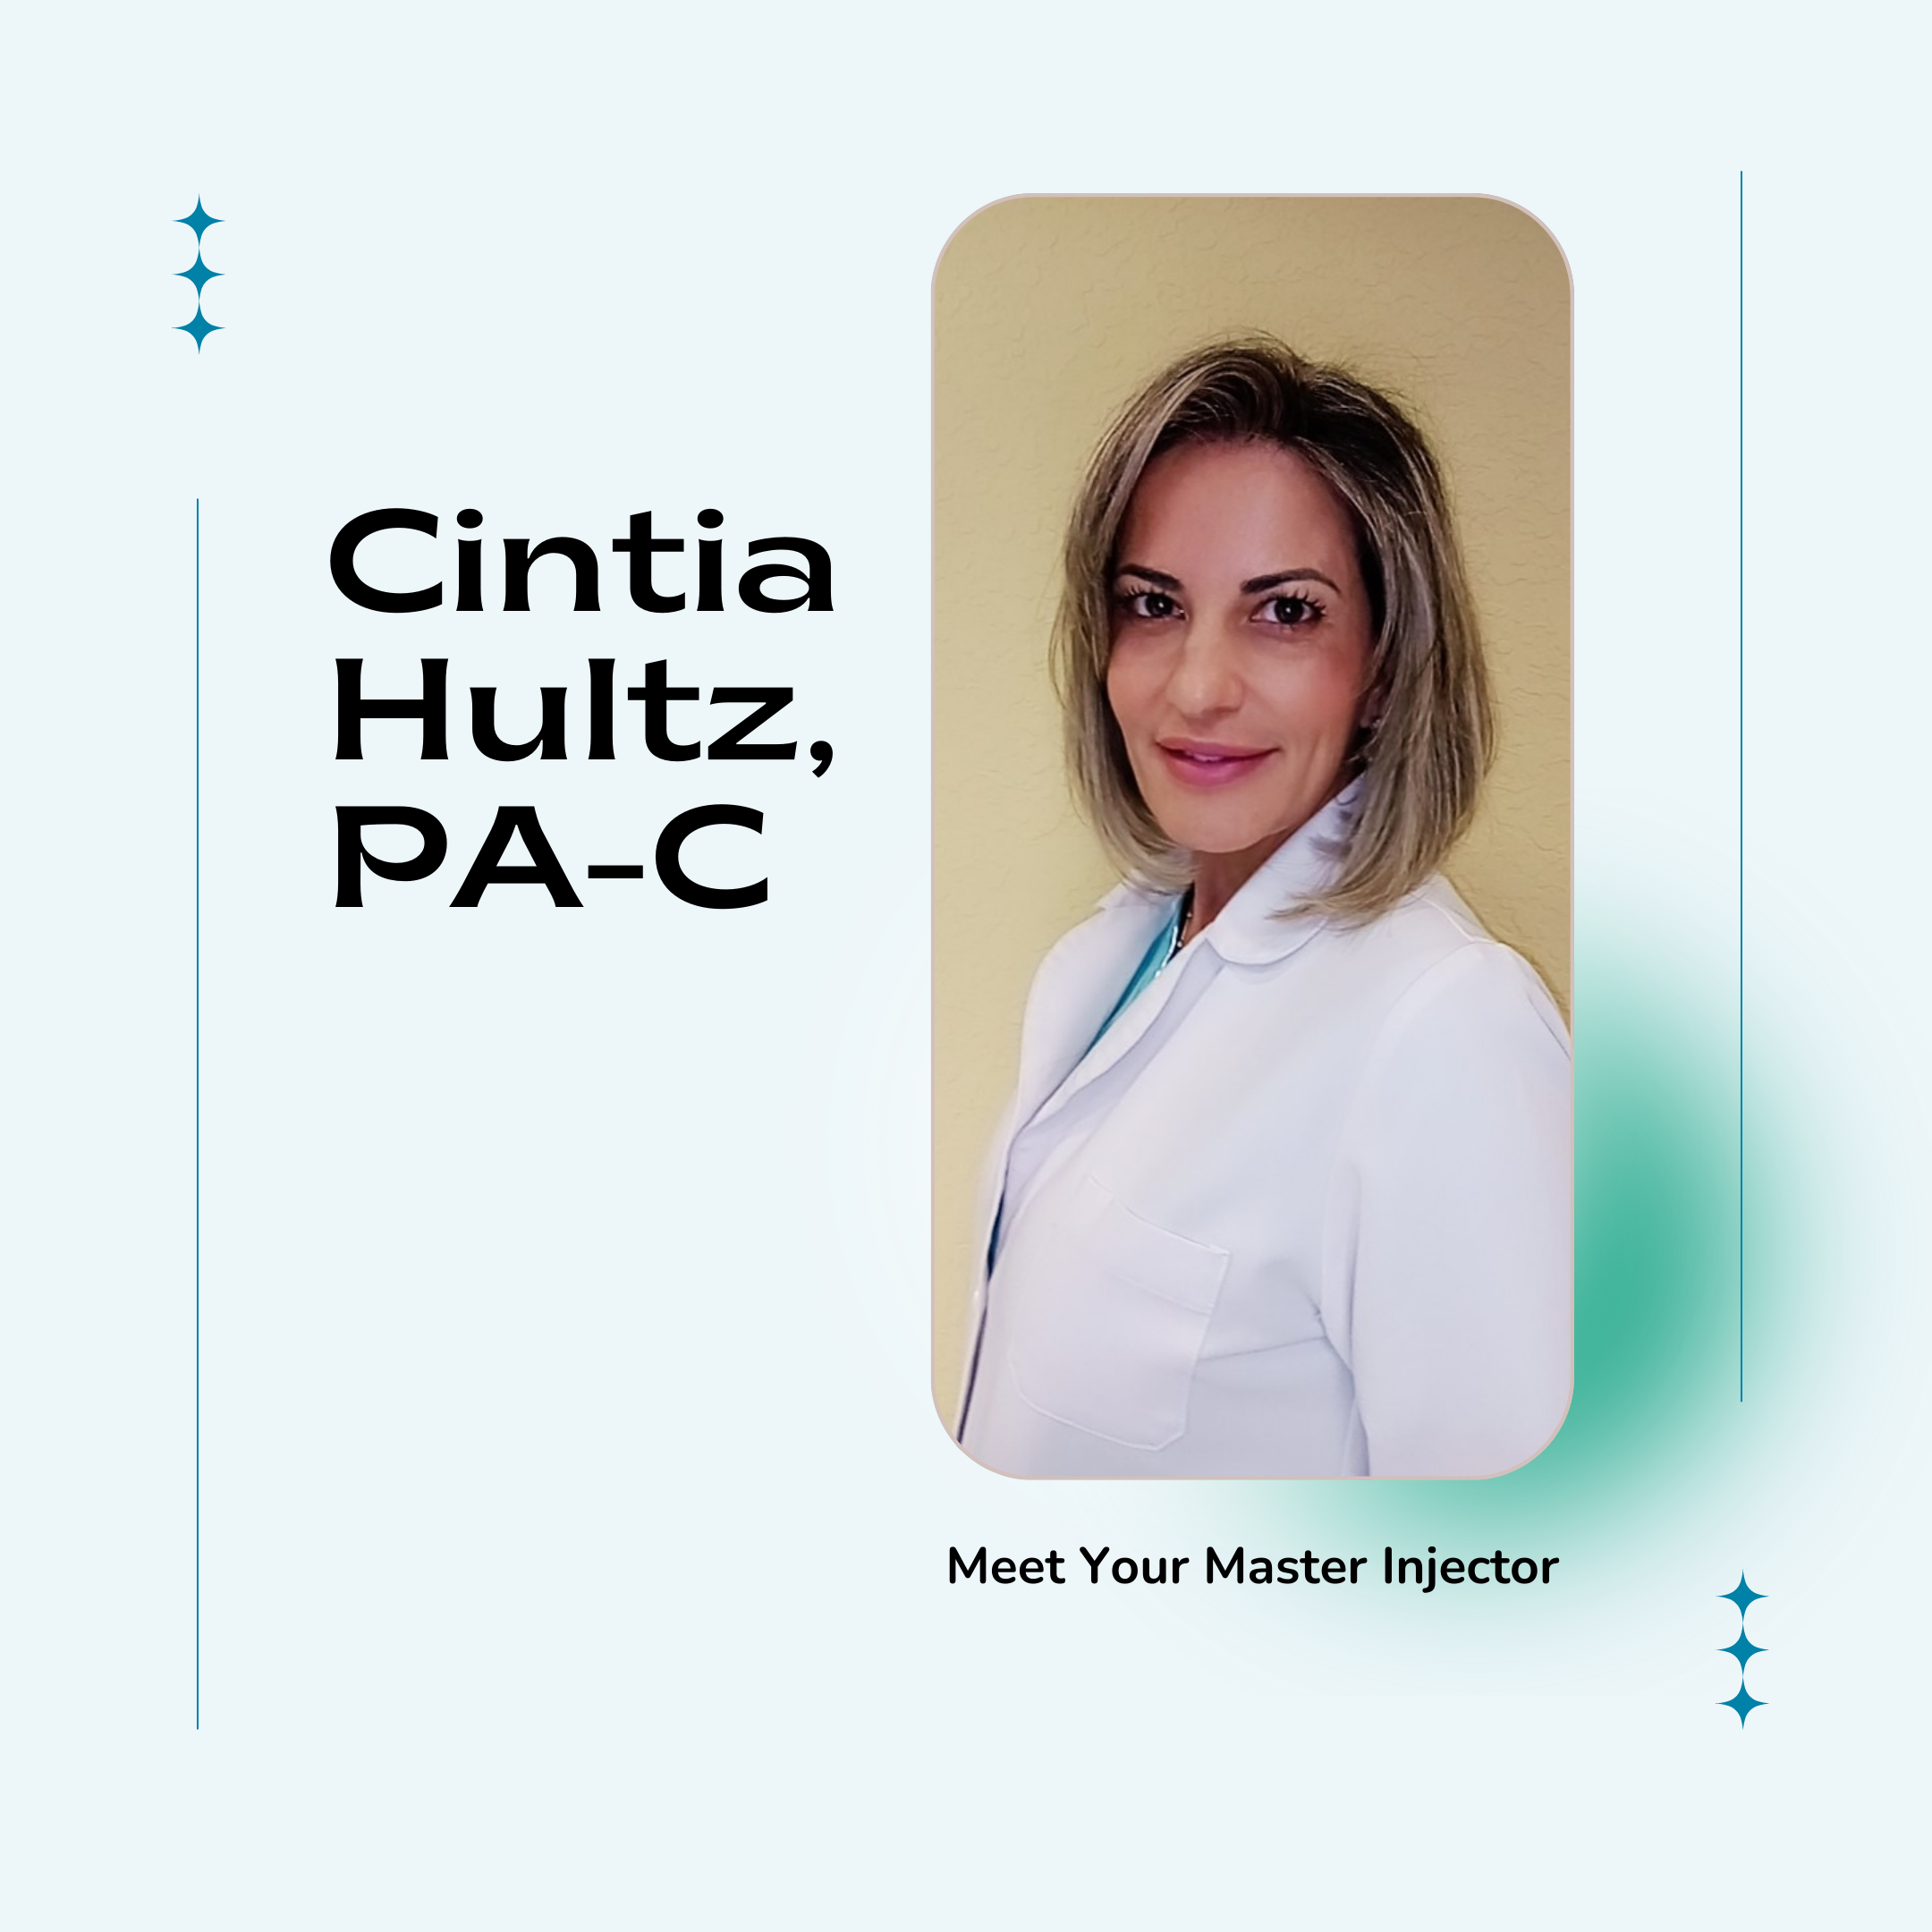 Cintia Hutlz, PA-C is South Florida’s leading cosmetic physician, with over 10 years of injection and cosmetic medicine experience. She is a master injector with expertise in face optimization using Revanesse Versa, Revanesse Lips, Radiesse and Belotero, anti-aging treatments using Botox/Xeomin. Cintia also specializes in weight loss programs with Semaglutide injections. Cintia has a warm and caring approach to client and patient goals and concerns.